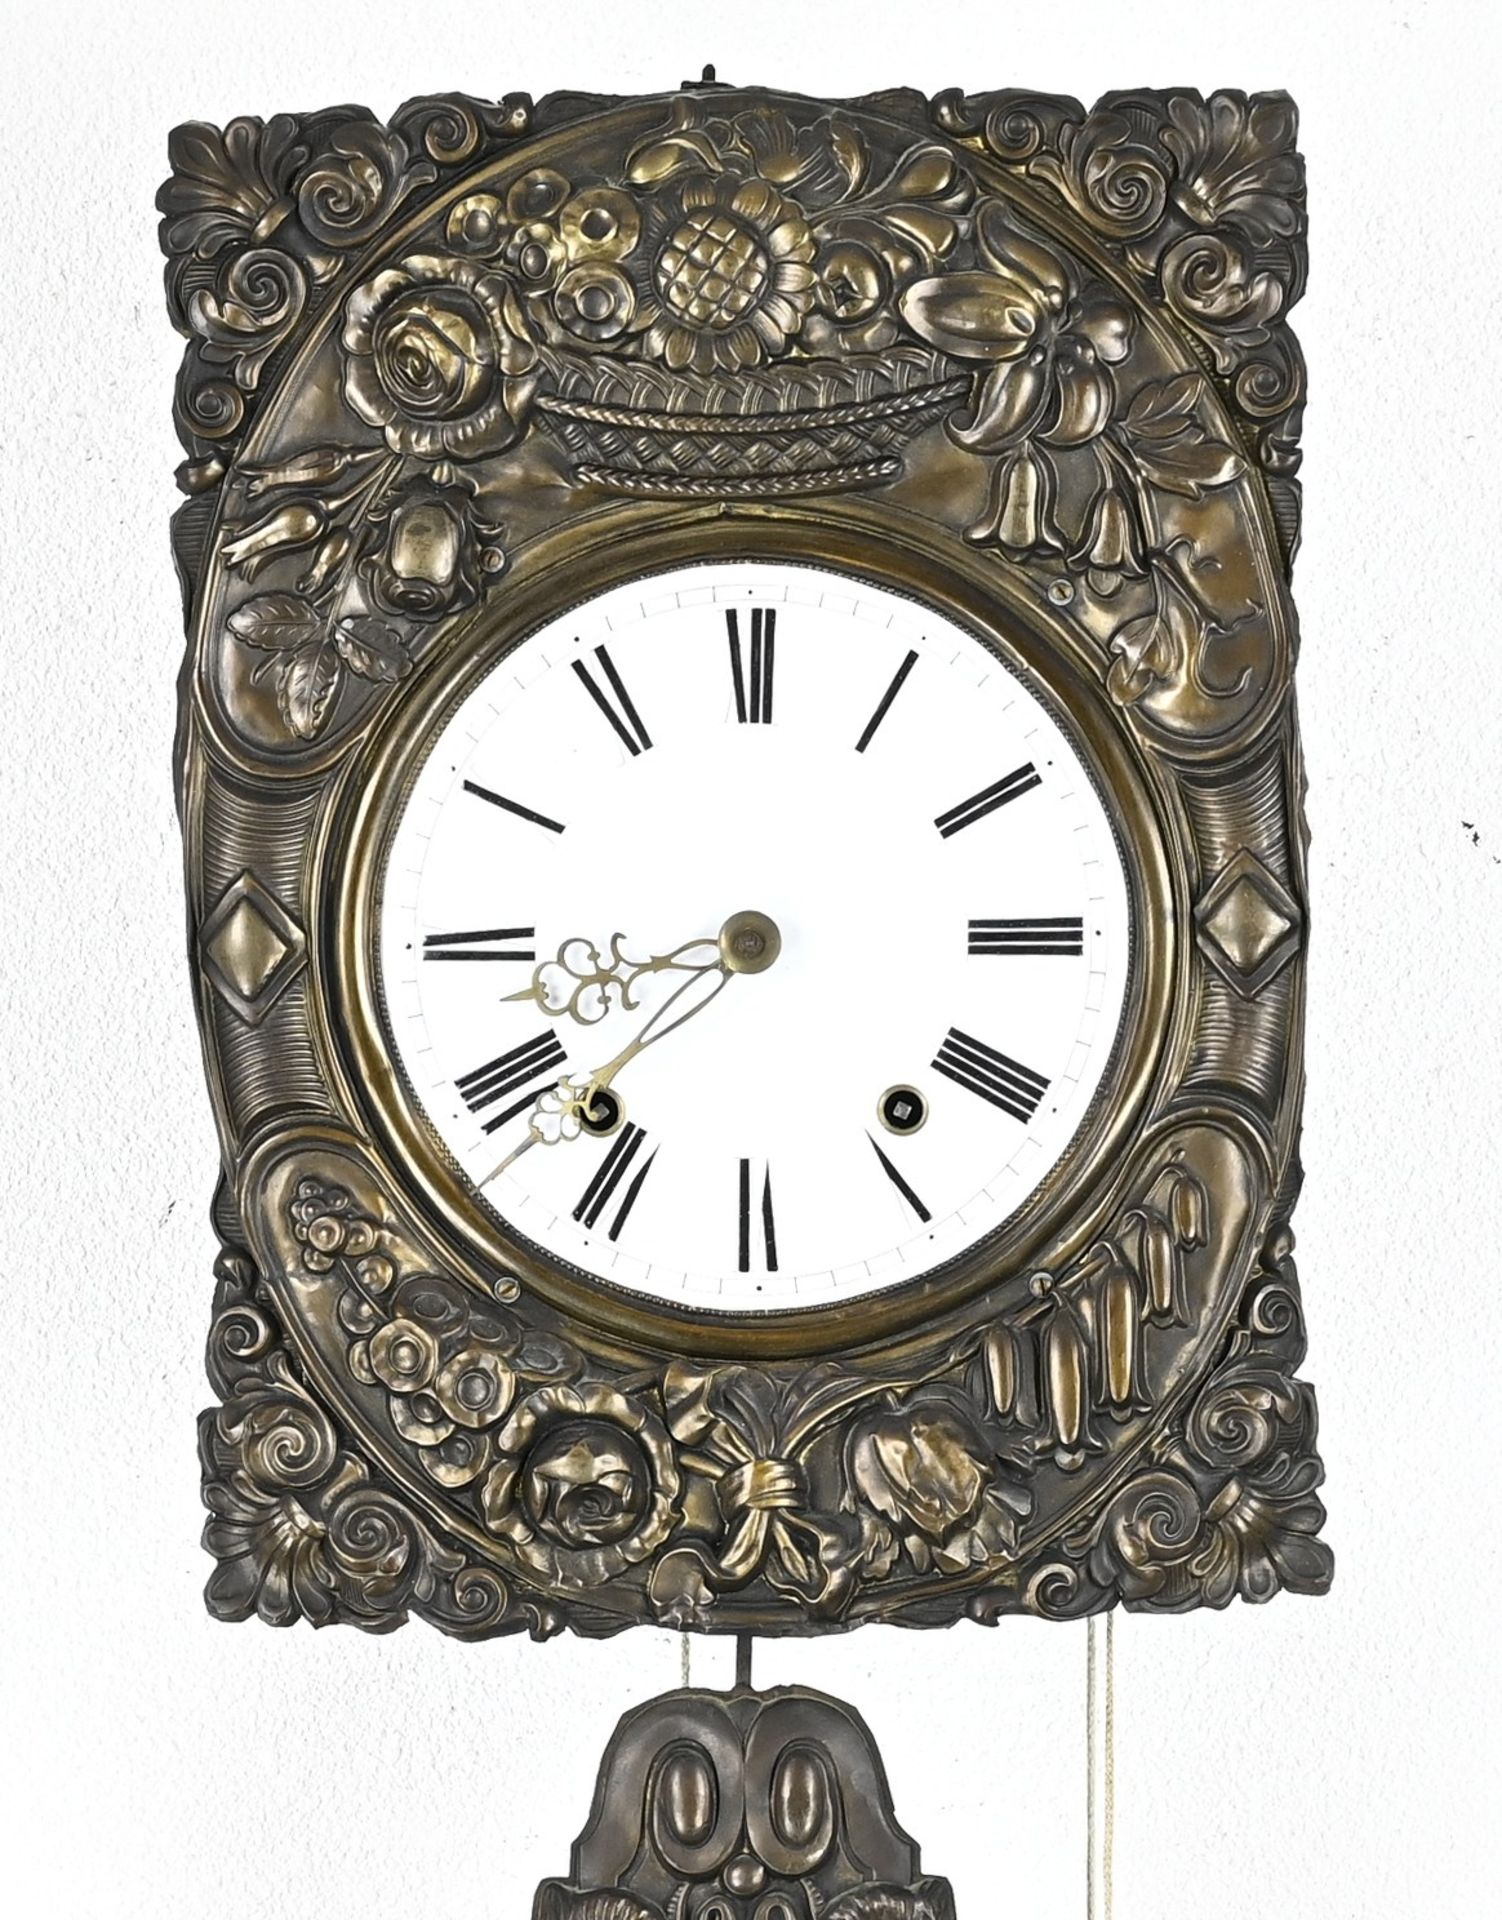 French comtoise clock - Image 2 of 2